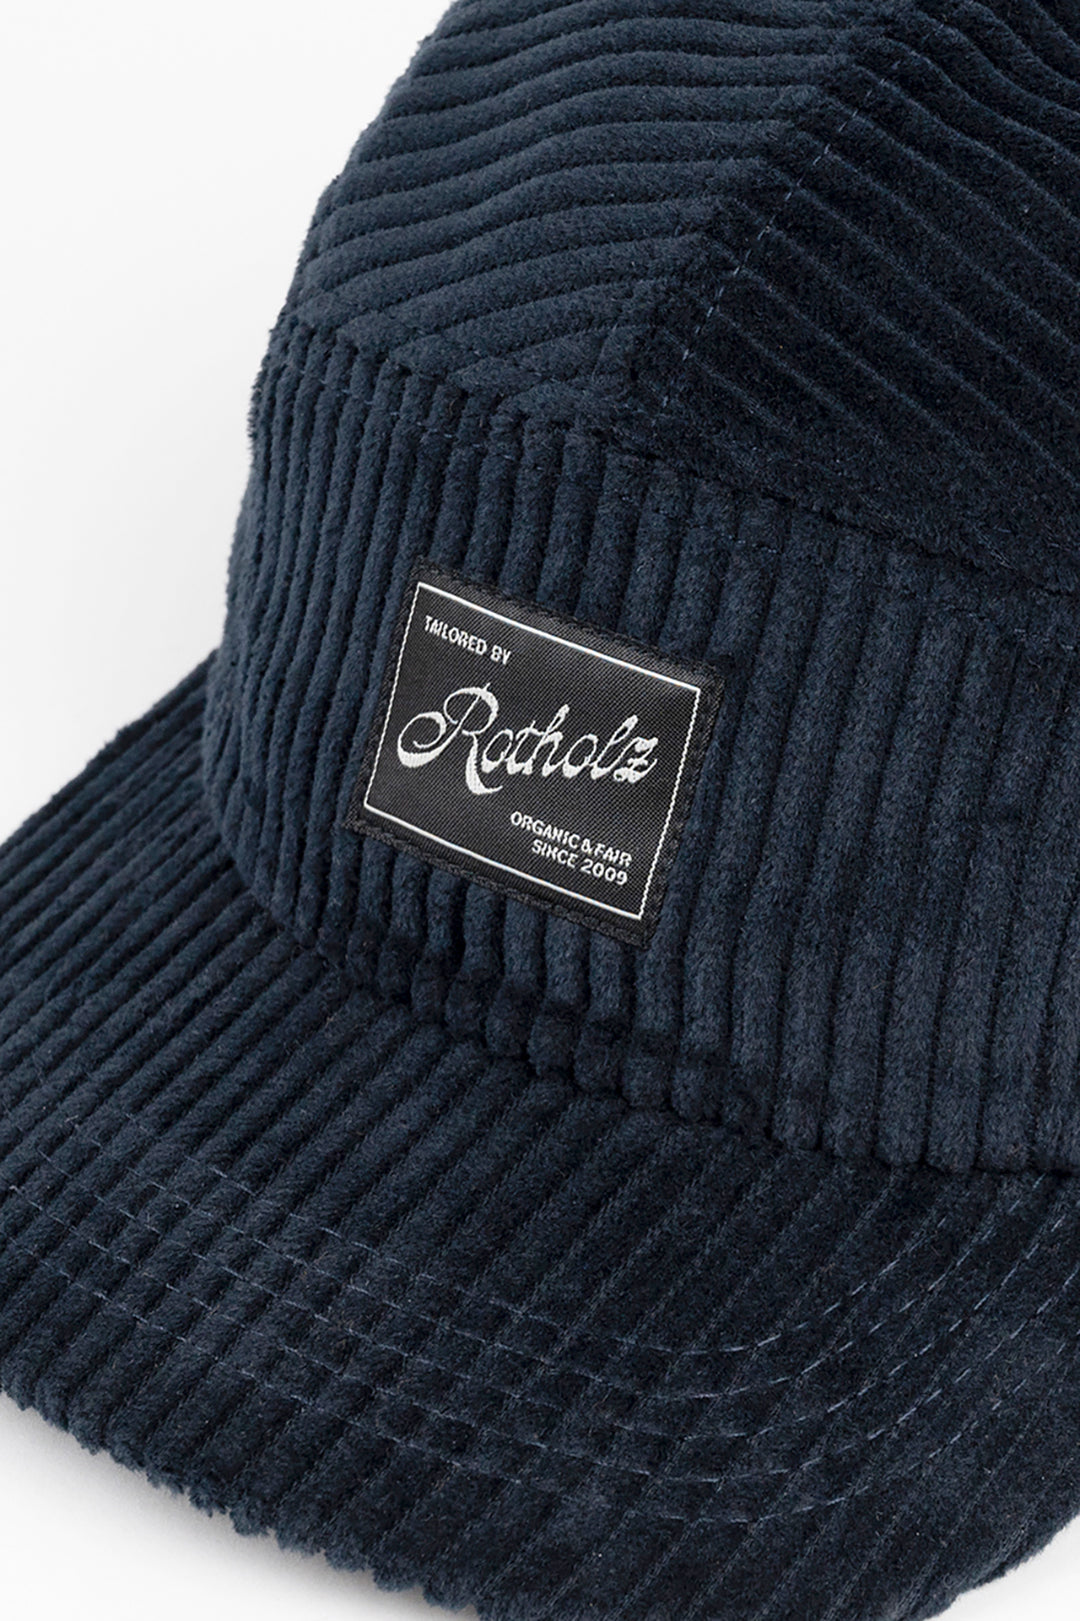 Dark blue cord cap 5-panel made of 100% organic cotton from Rotholz